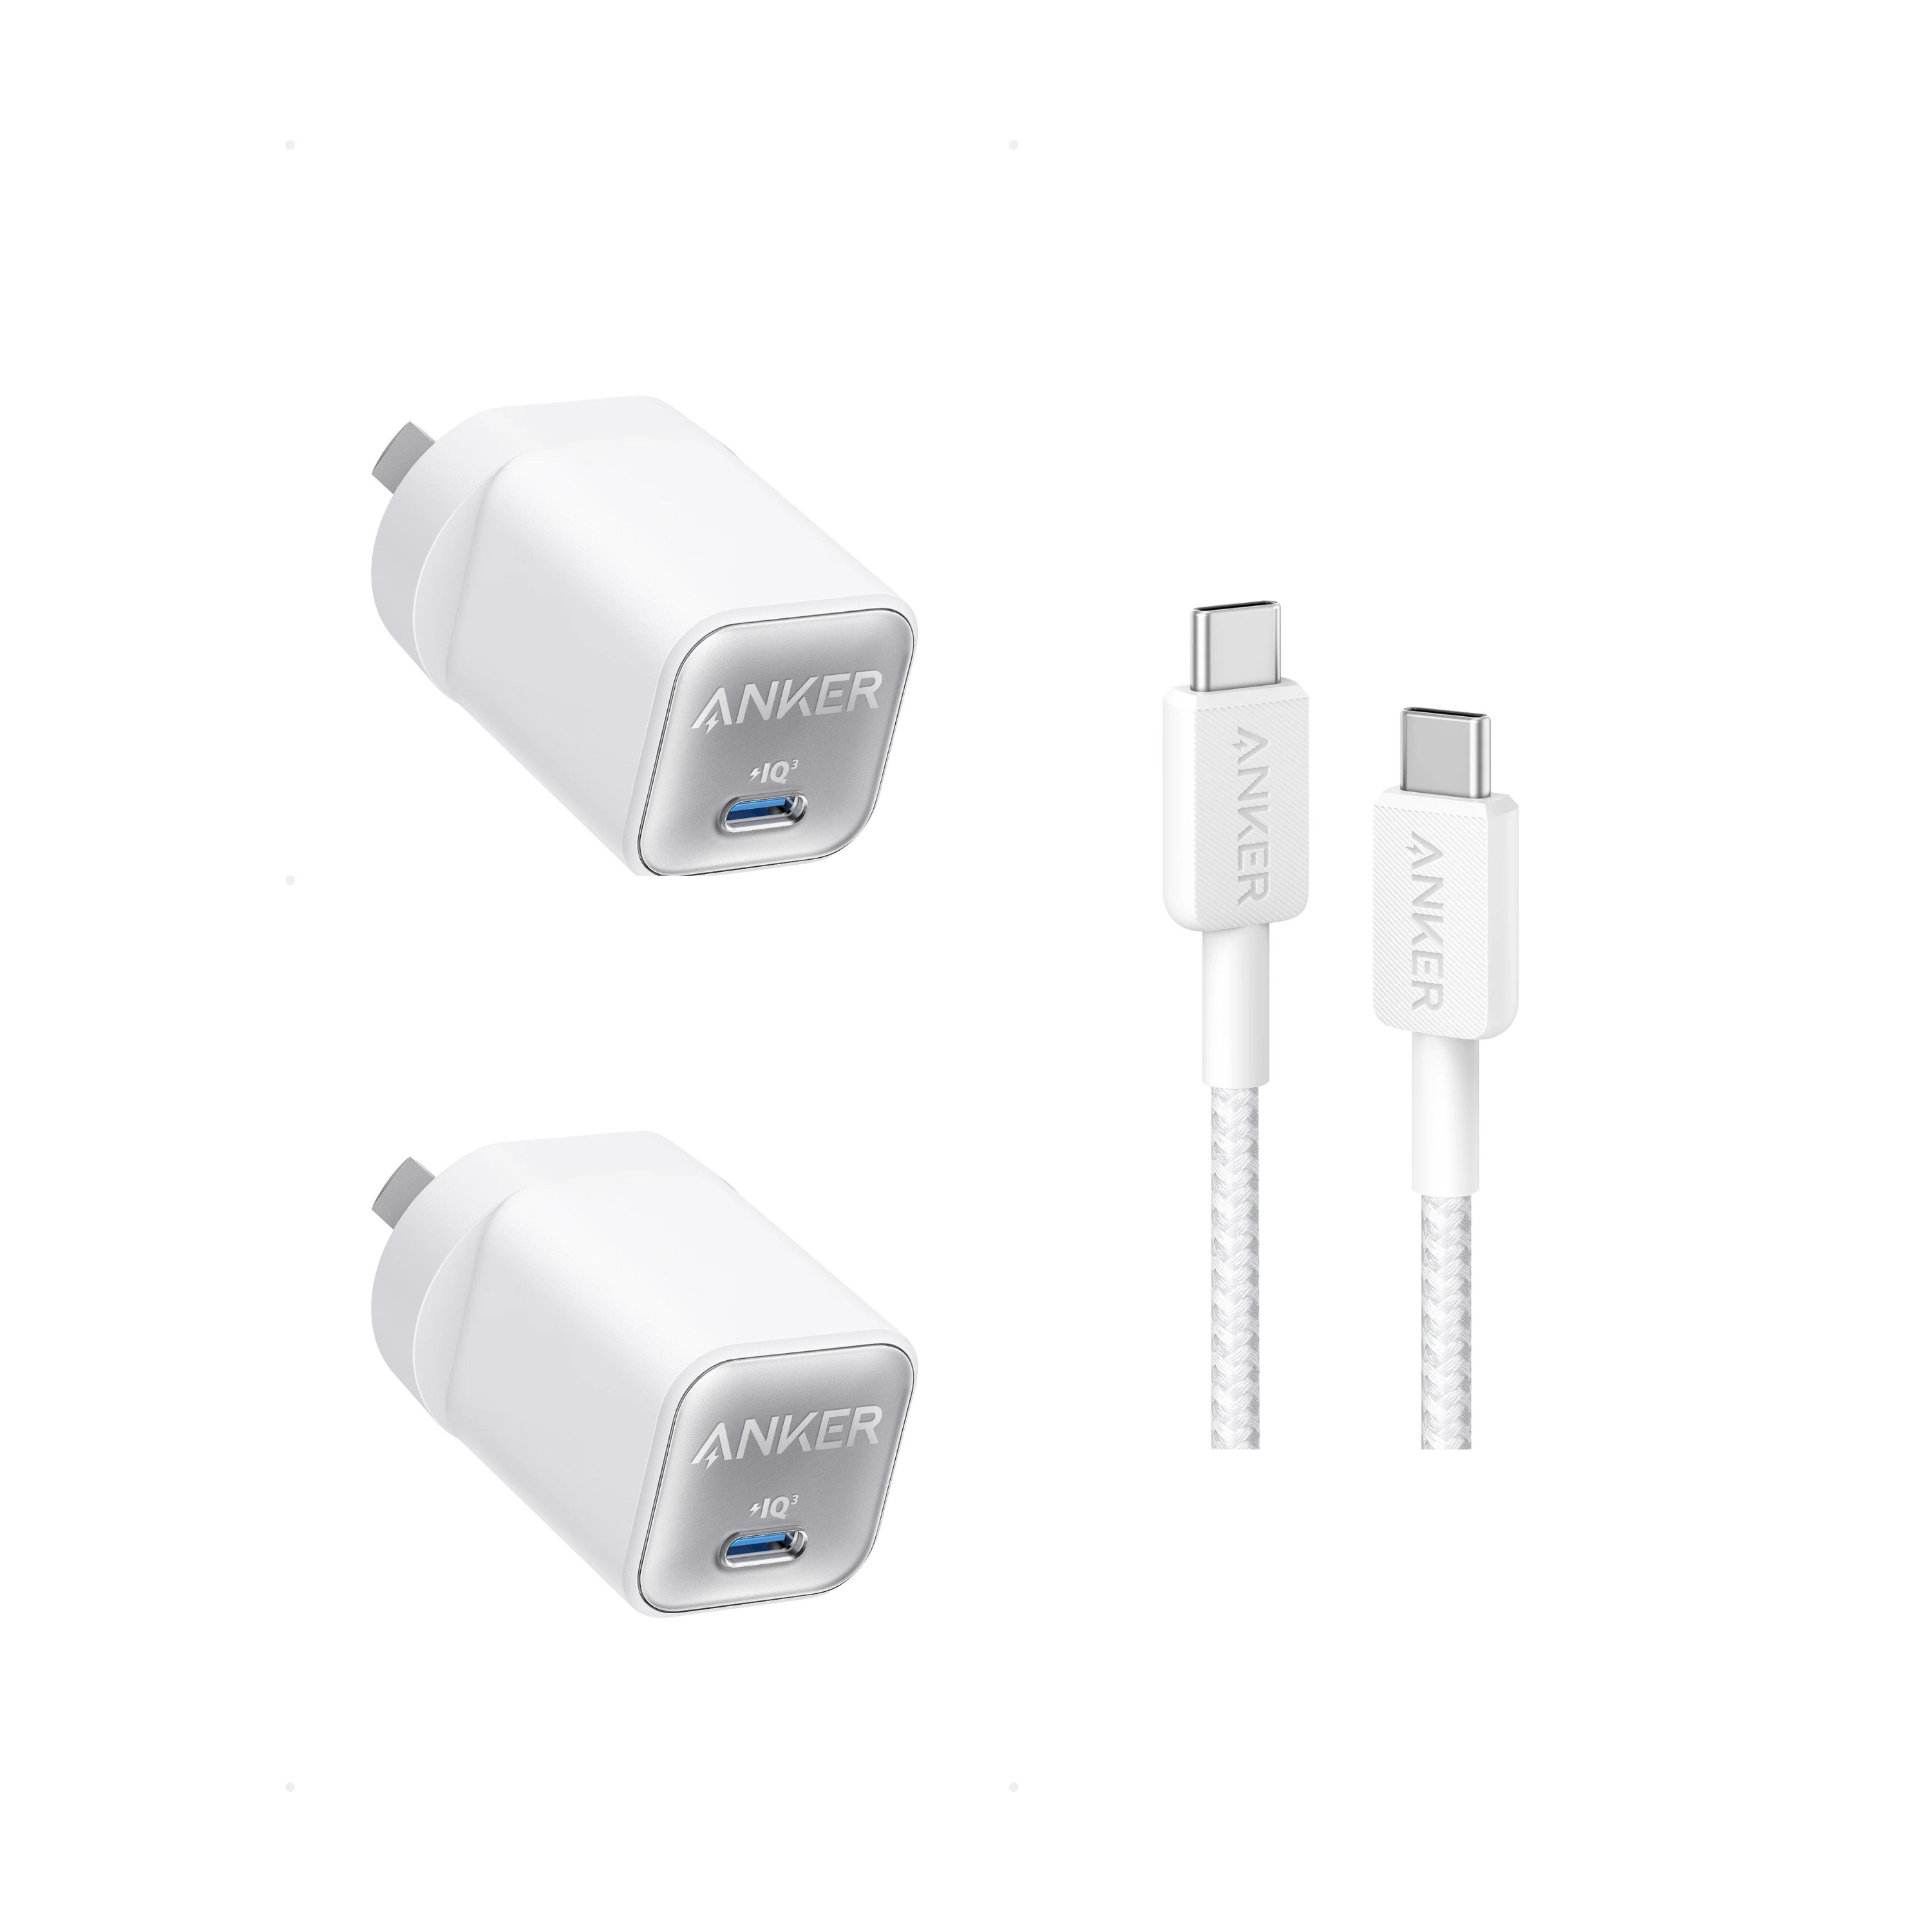 2 × Anker 511 Charger (Nano 3, 30W) and Anker 322 6ft USB-C to USB-C Cable